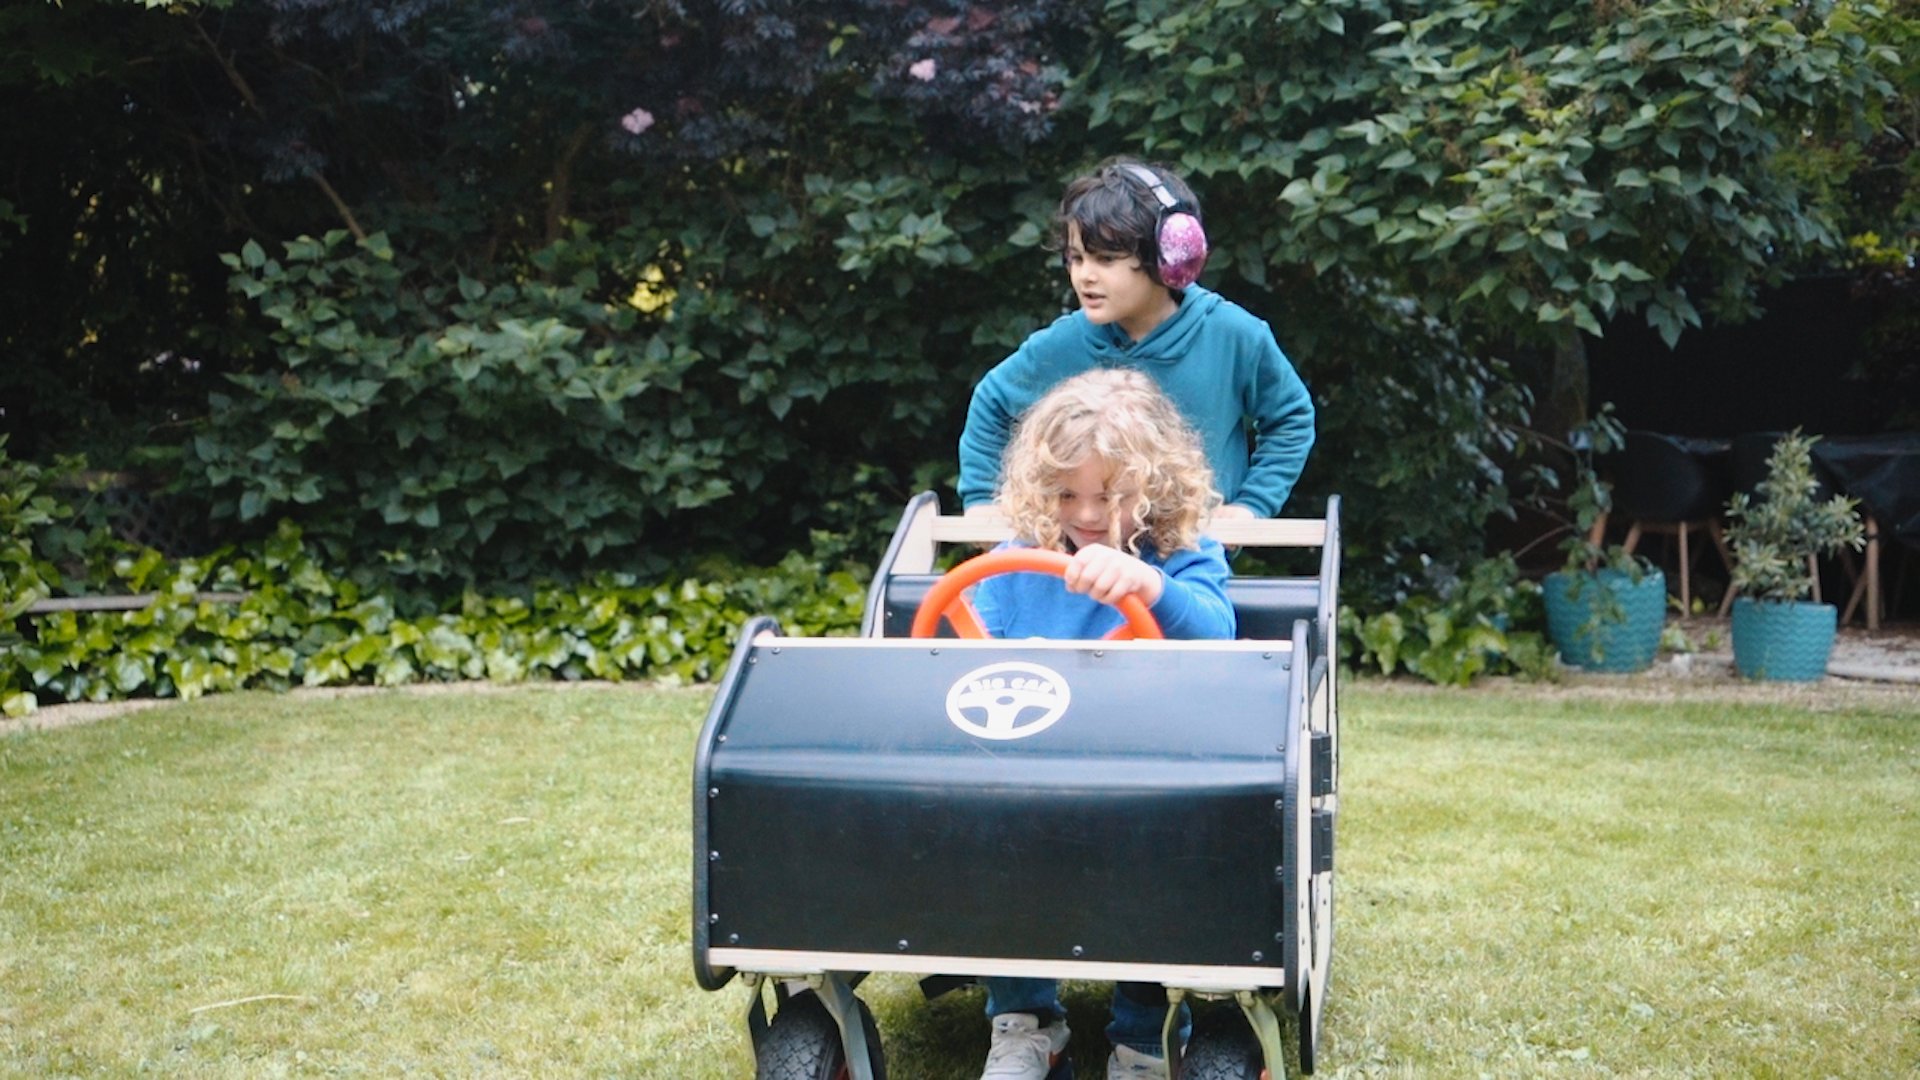 Two children around 6 -8 years old play with the Big Car in a garden. One child with curly blonde hair sits in the car and holds the steering wheel. Another child with short dark hair and purple ear defenders stands at the back fo the car holding the push bar. 